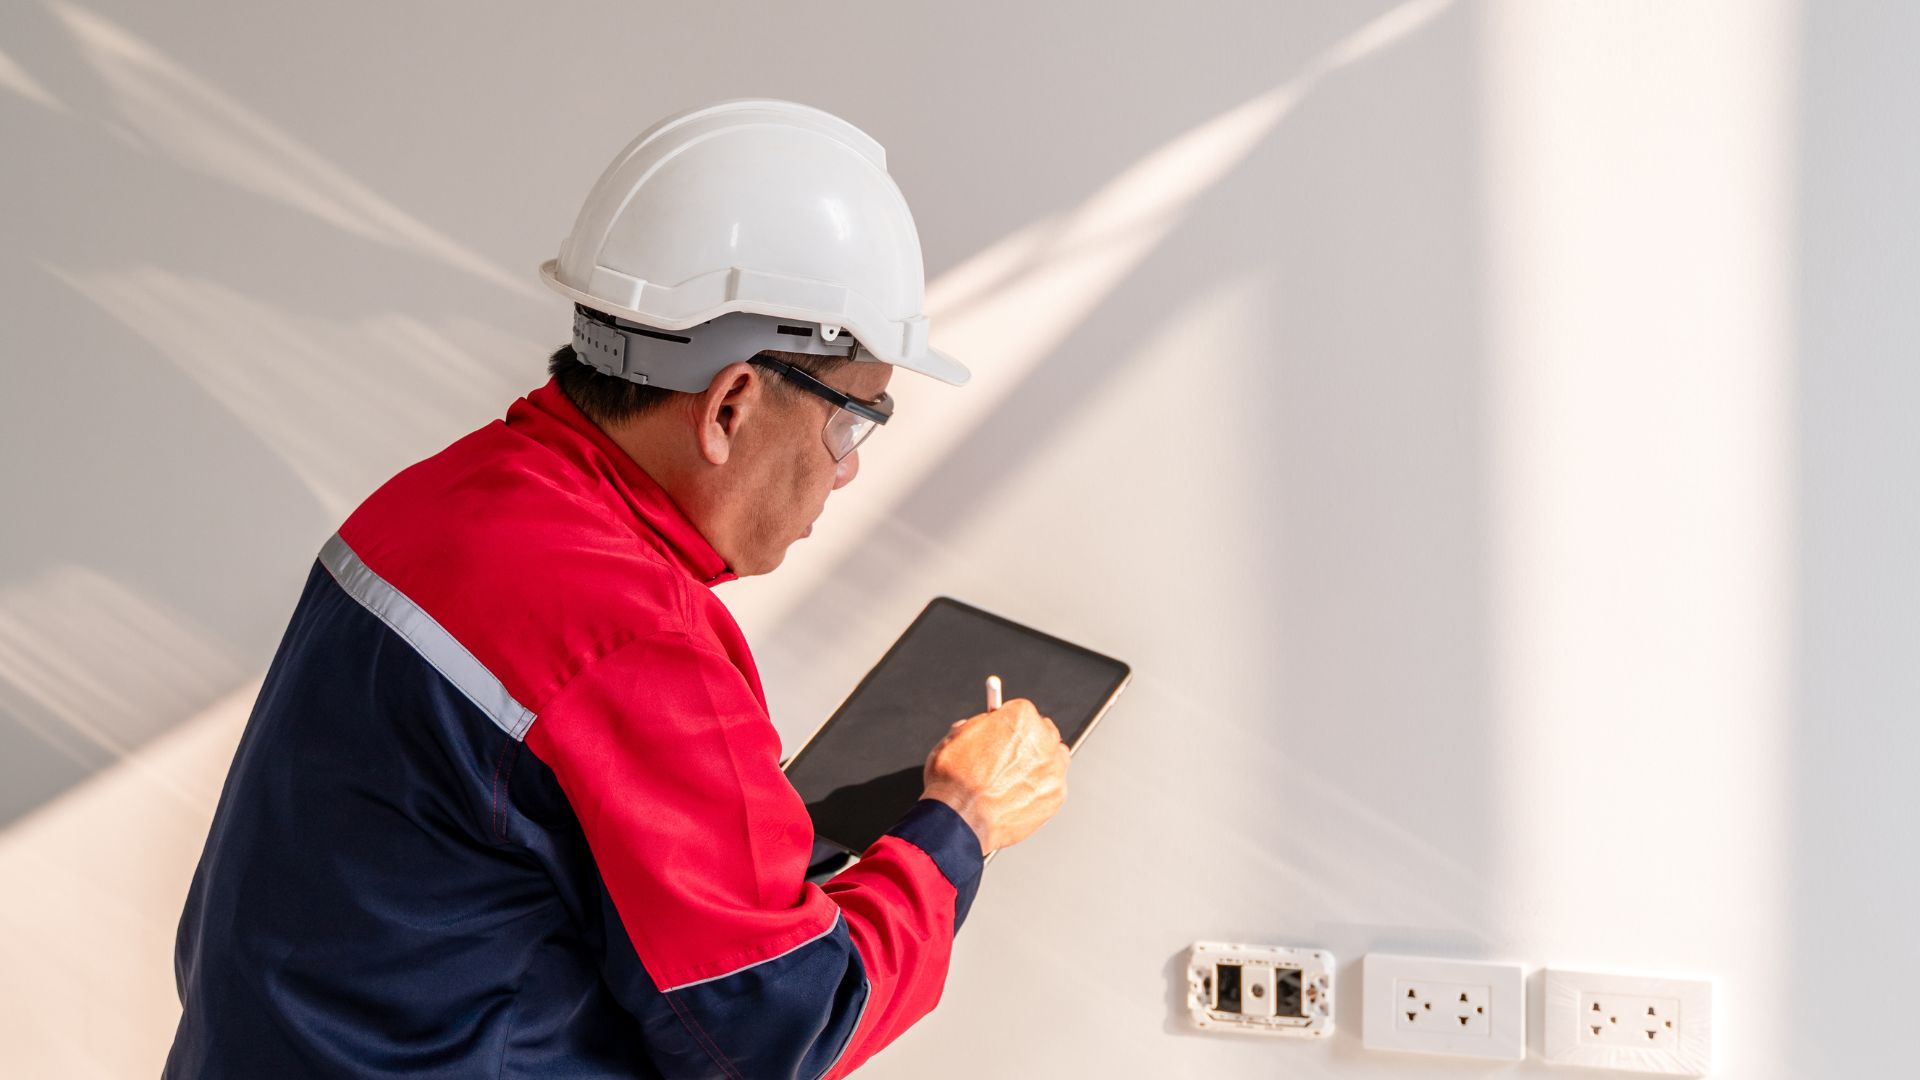 Benefits of Professional Electrical Inspections by Electricians